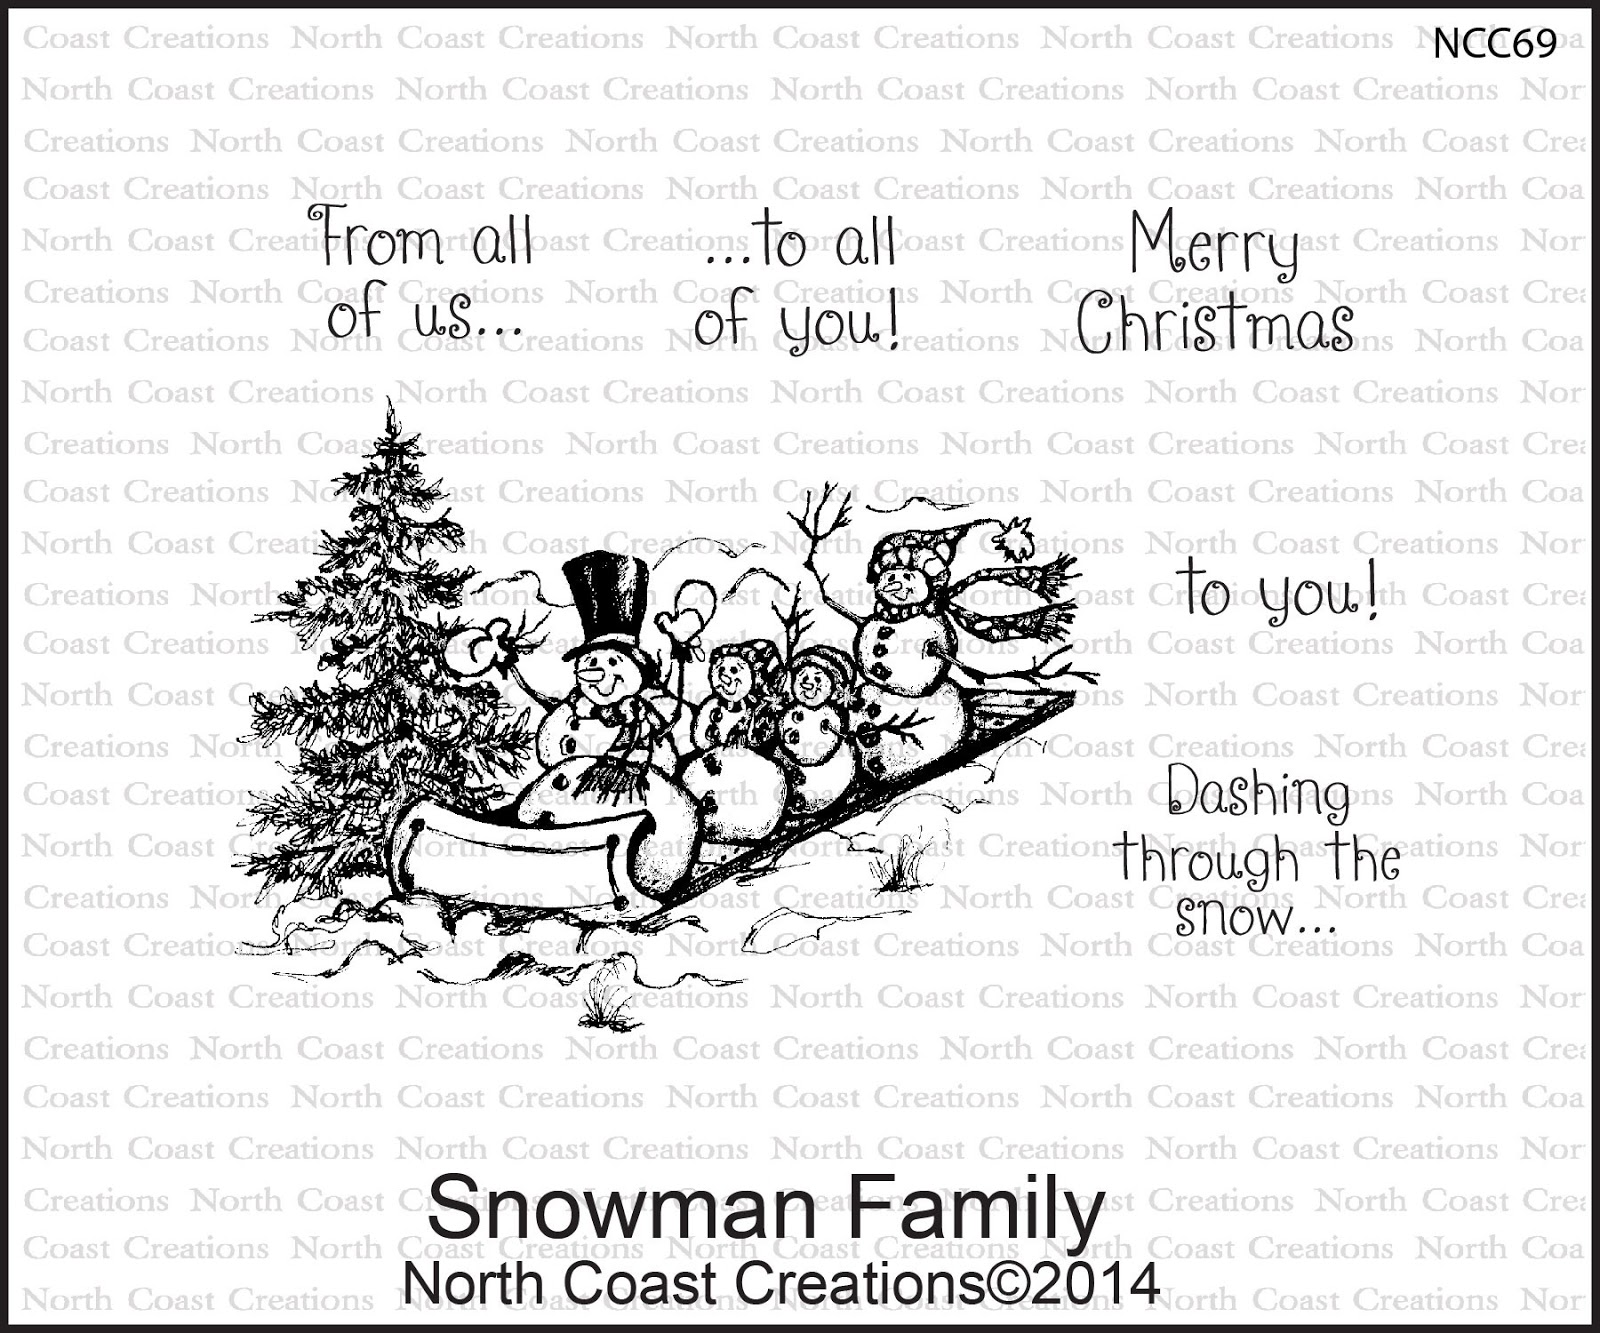 https://www.northcoastcreations.com/index.php/new-releases/ncc69-snowman-family.html